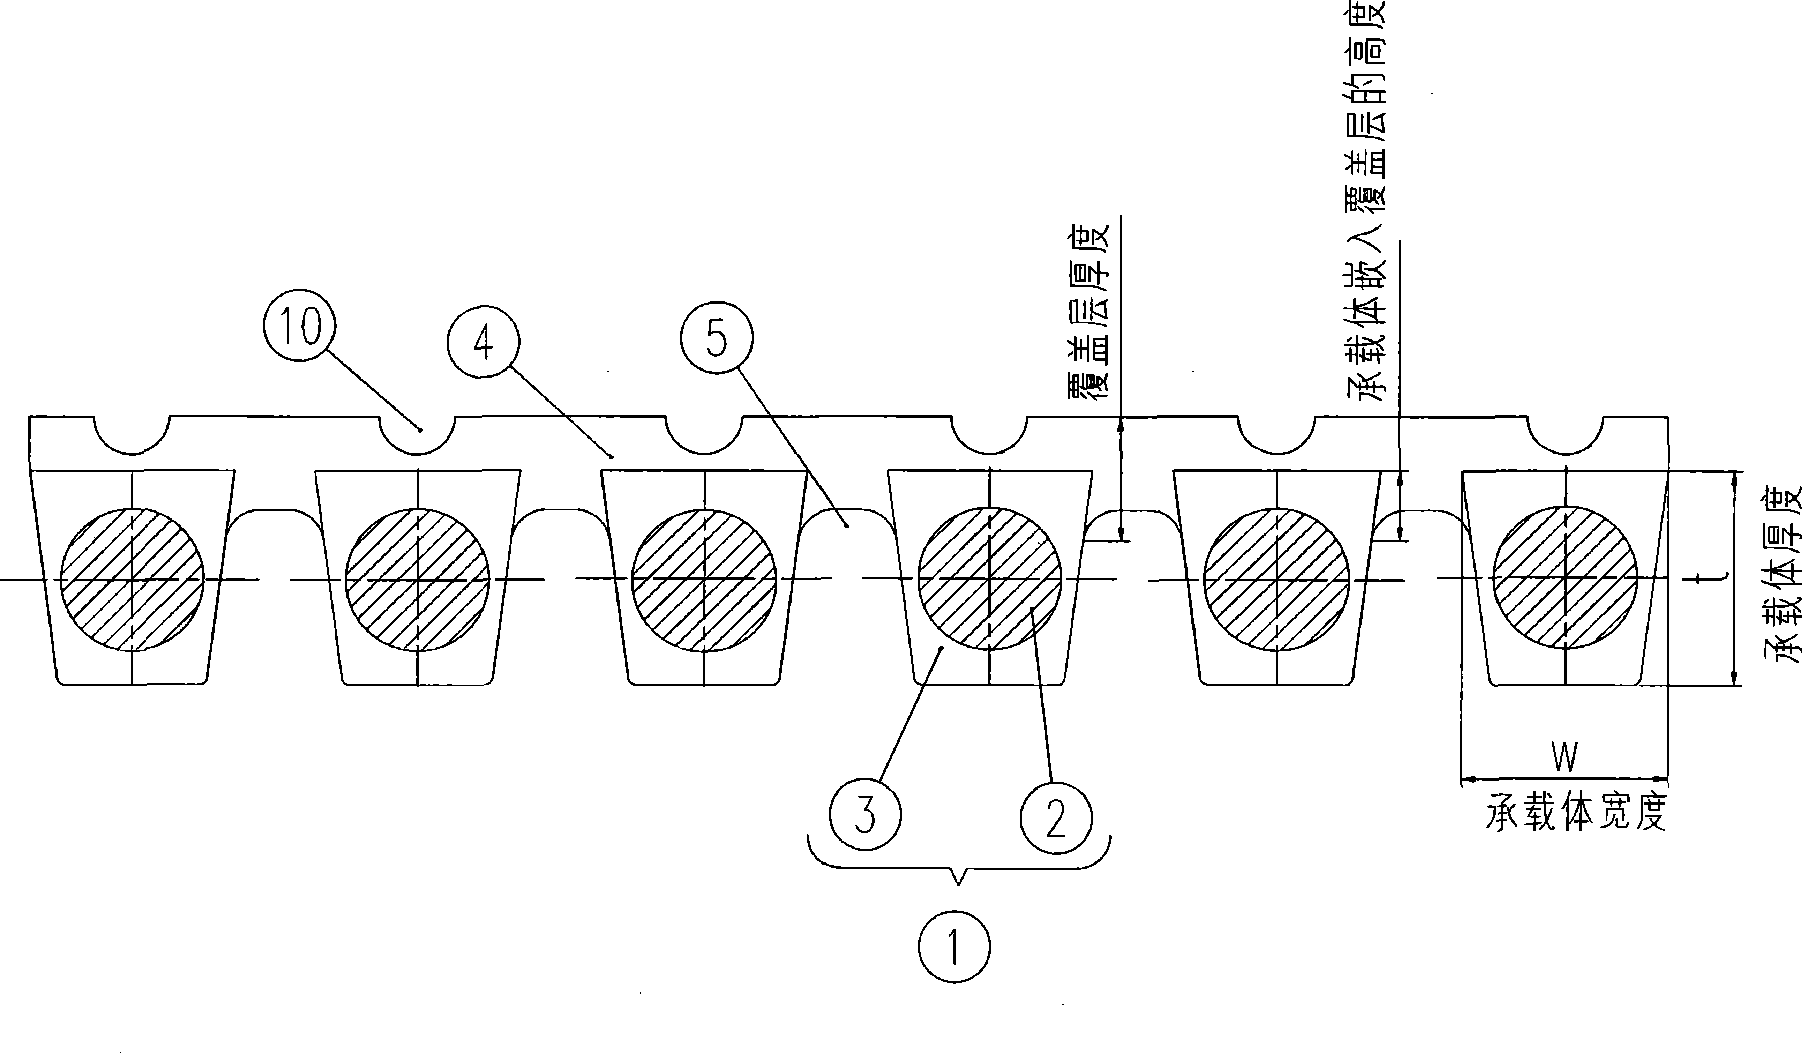 Rope and traction pulley wheel for elevator apparatus and elevator apparatus